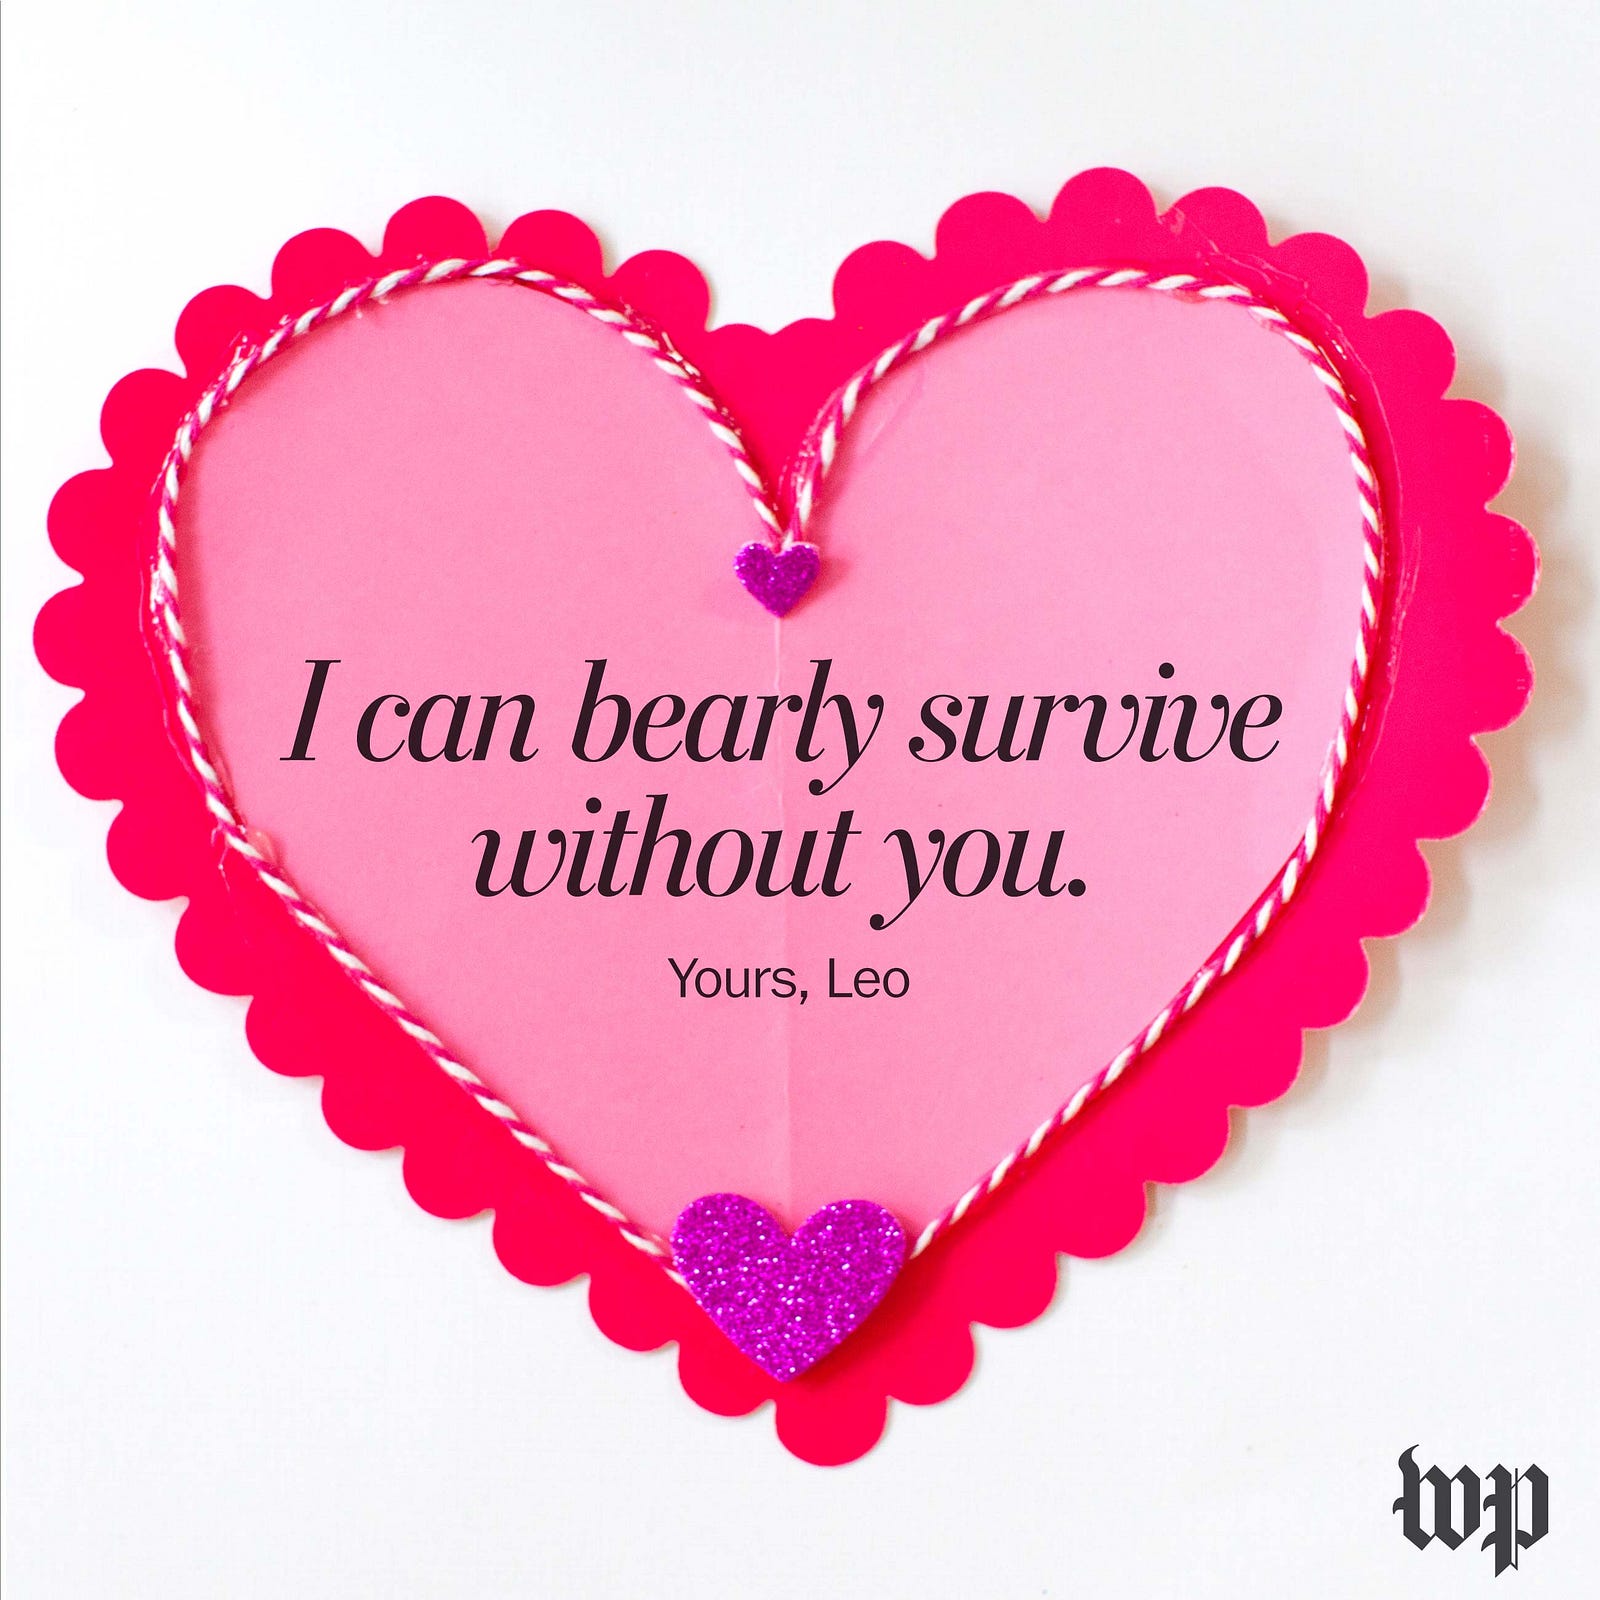 In need of some snarky Valentines? We’ve got you covered